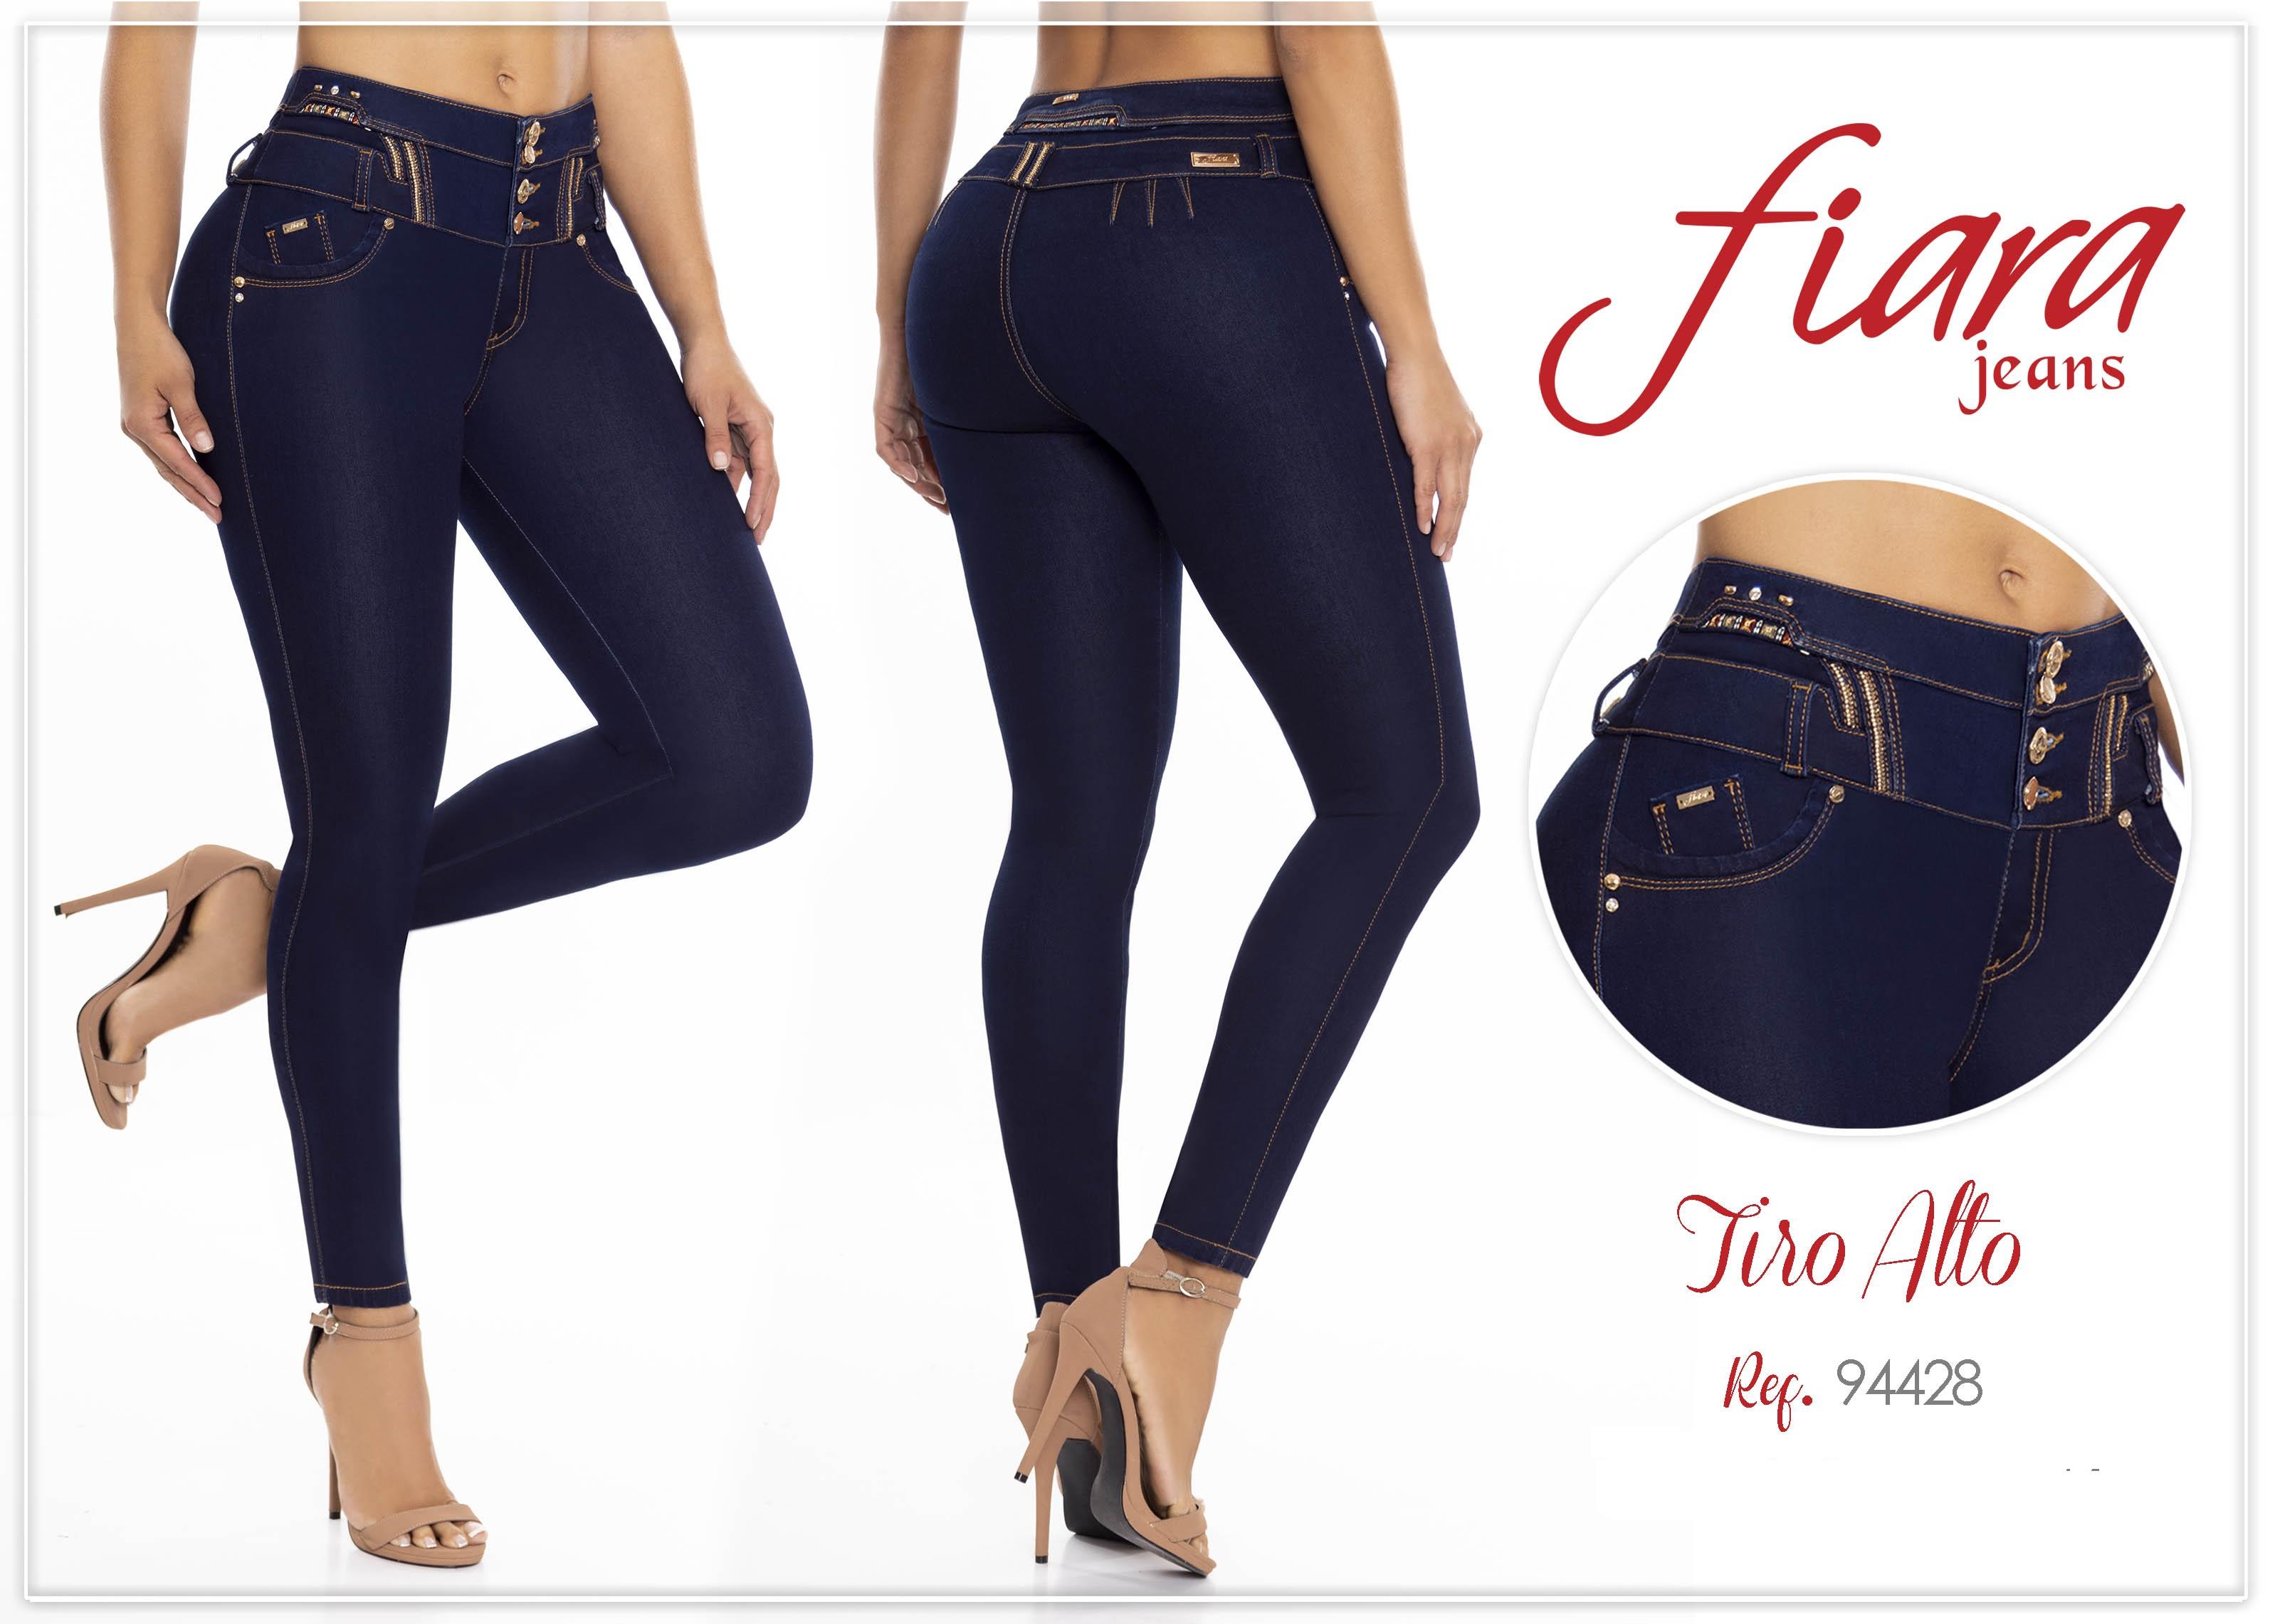 Jeans Levantacola Colombiano - Ref. 248 -94428 D